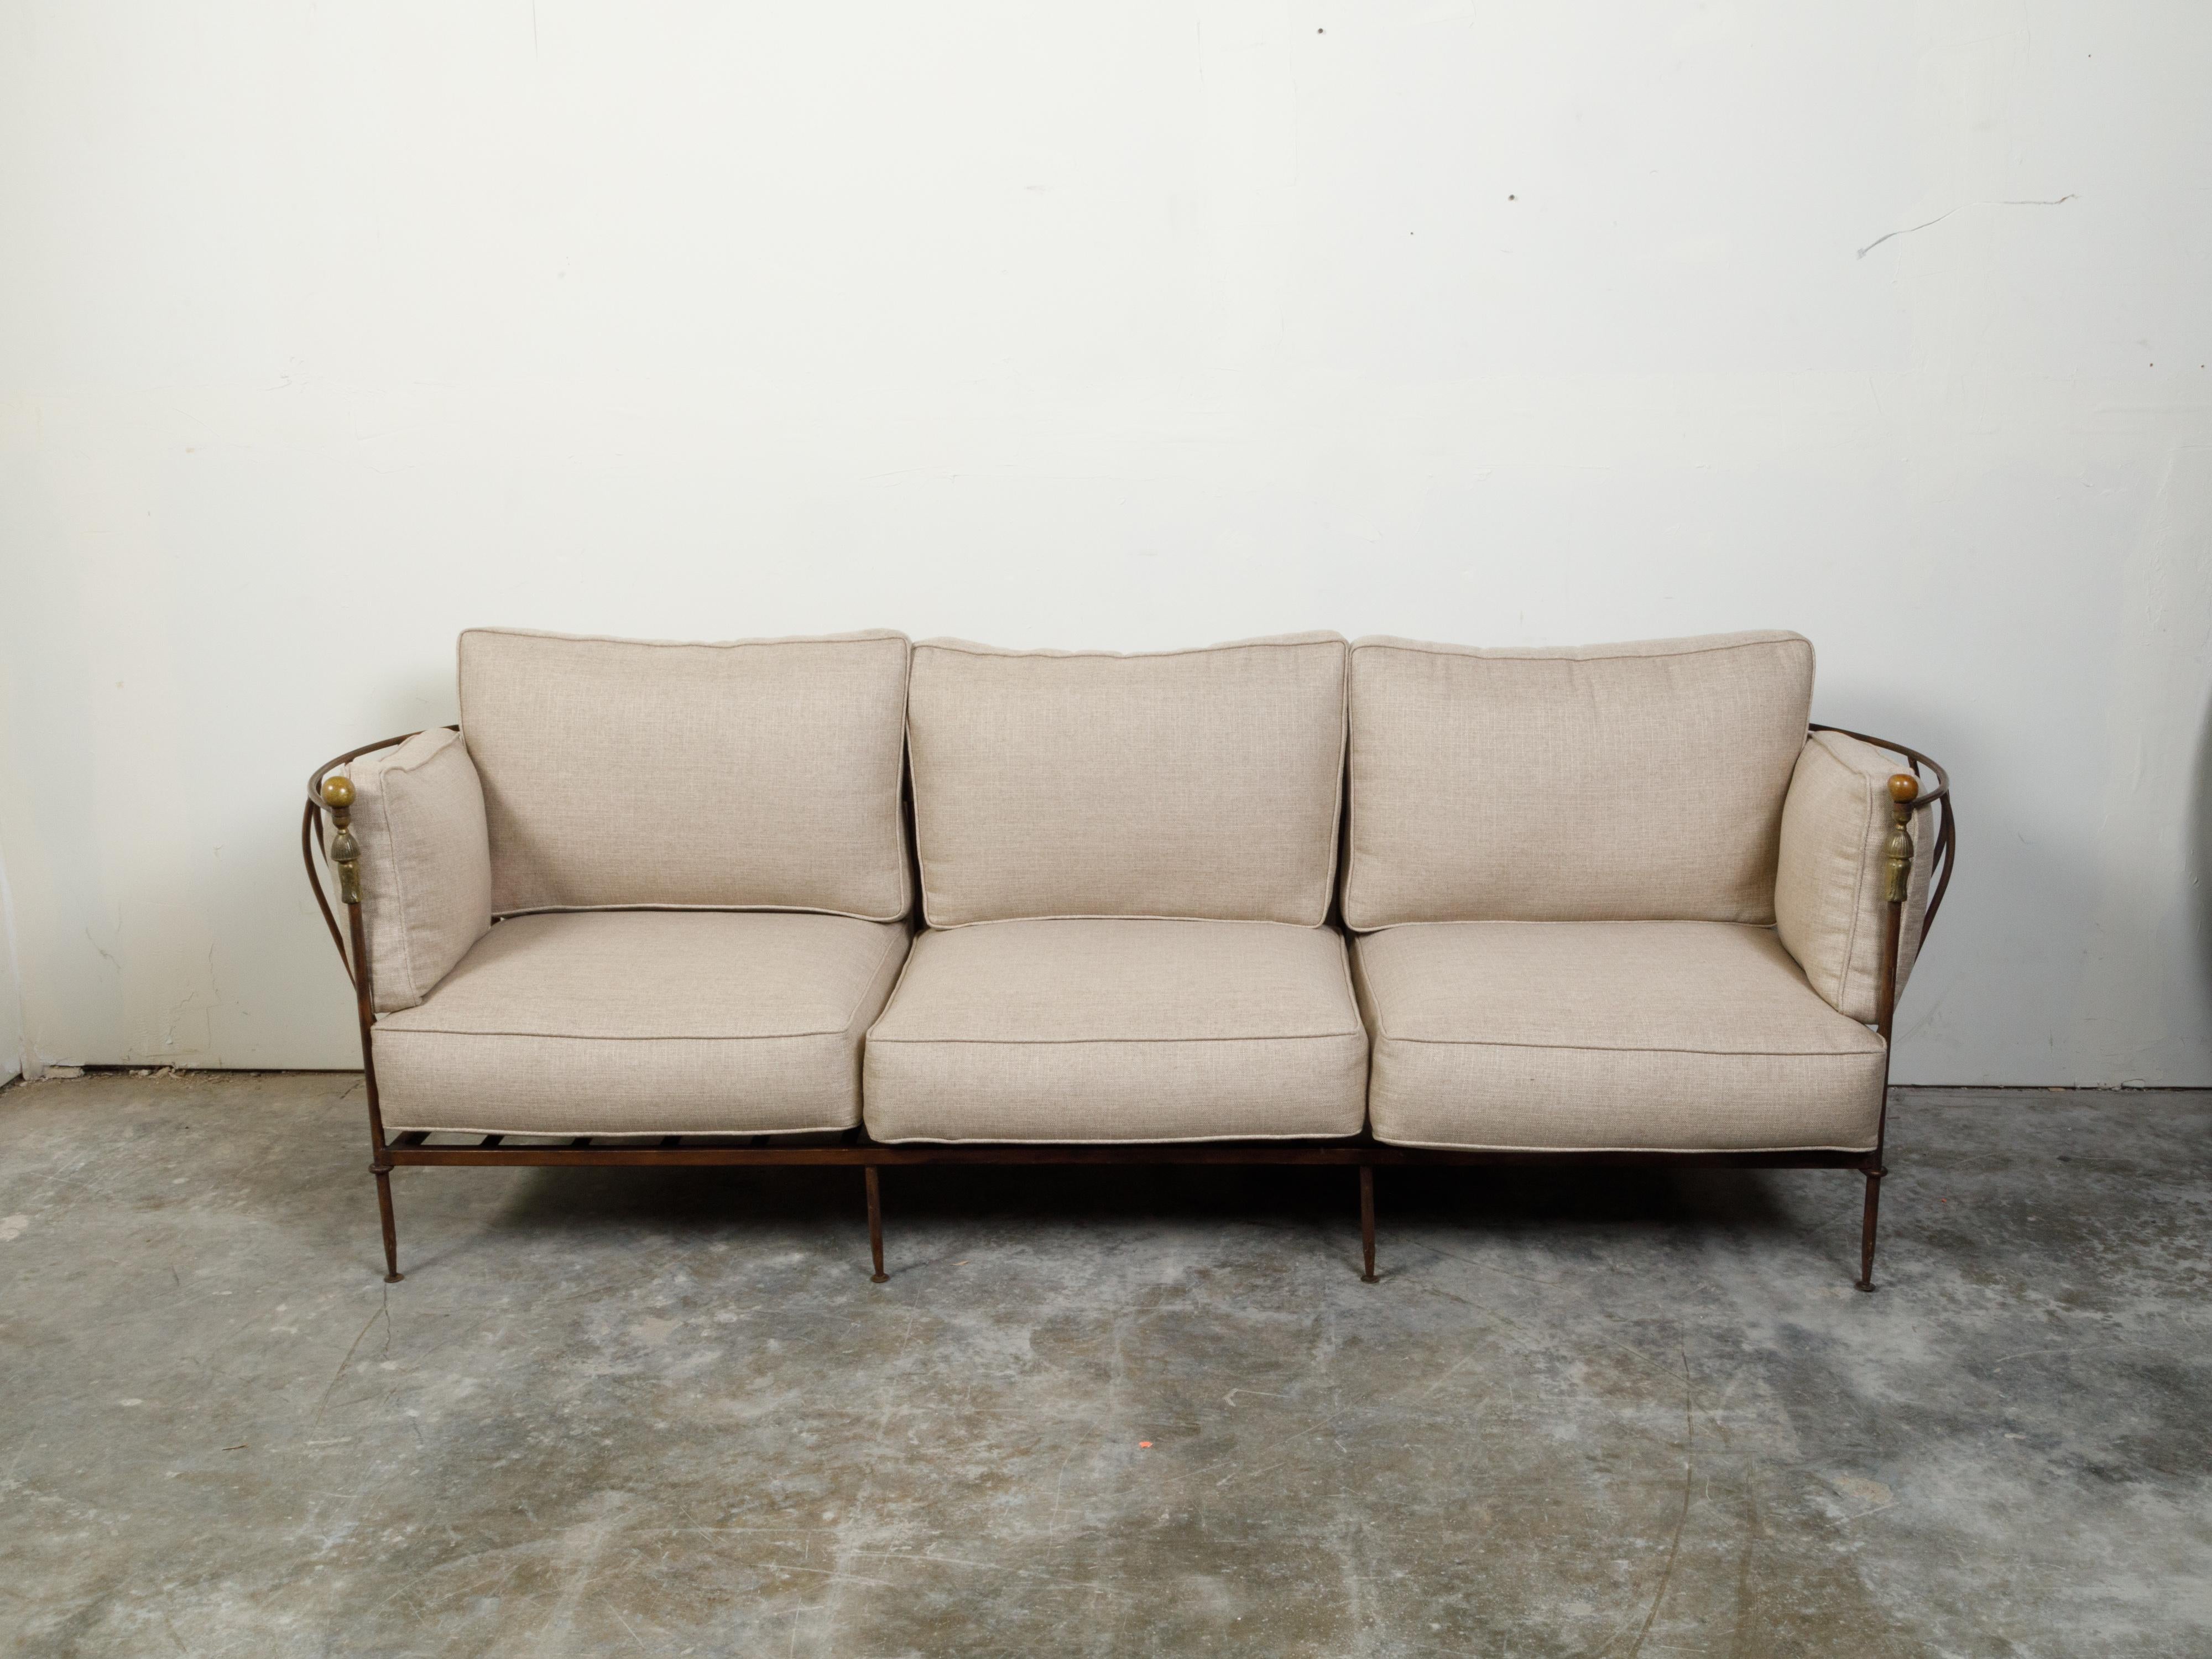 An iron and brass sofa from the mid 20th century possibly by Michael Taylor, with linen upholstery. Created during the midcentury period, this three-seat sofa features an iron structure with curving arm supports, accented with brass spheres and